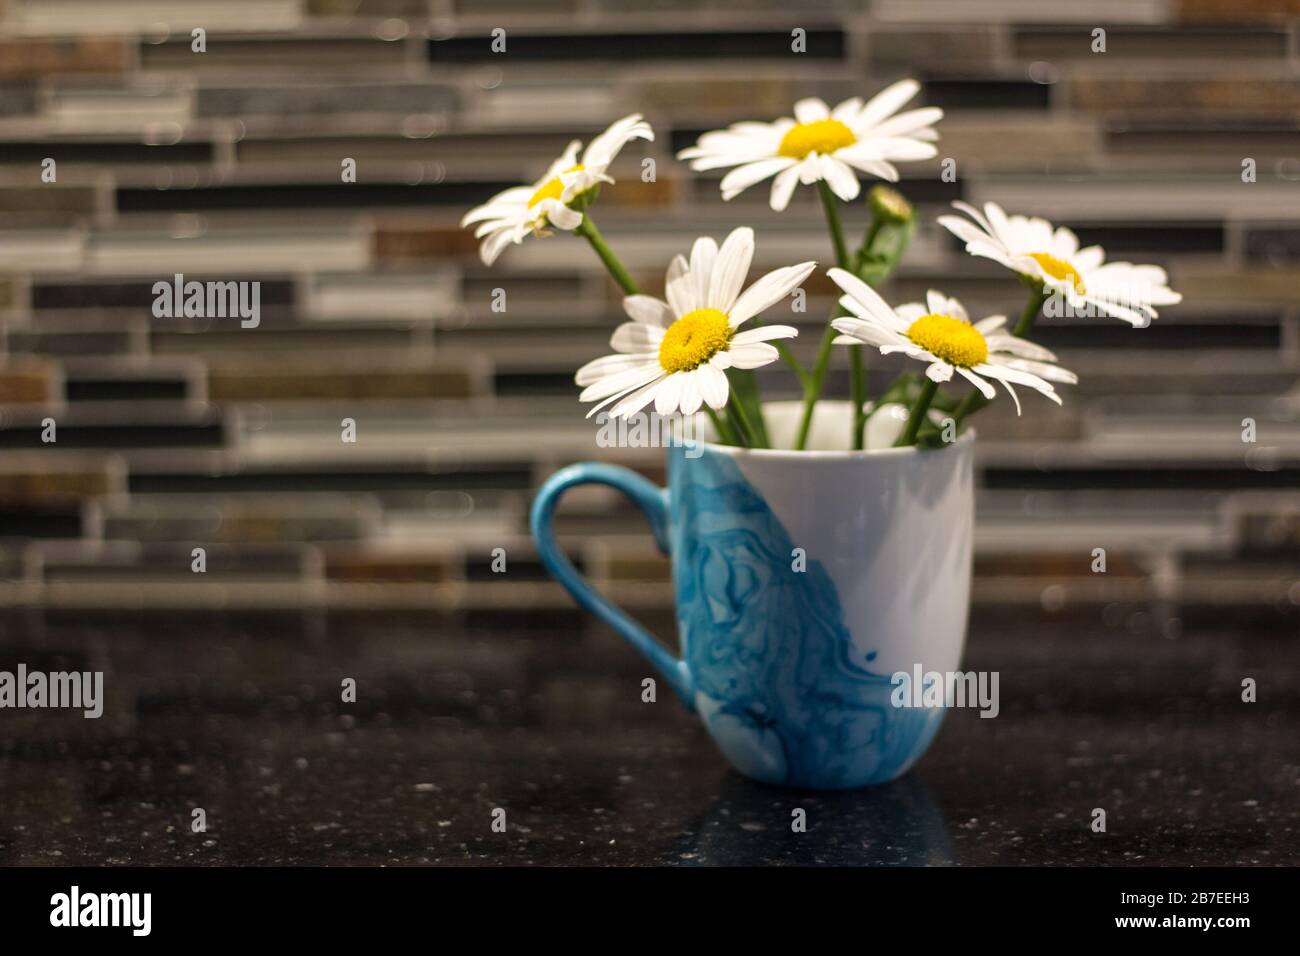 Daisies in a blue mug on a kitchen counter Stock Photo